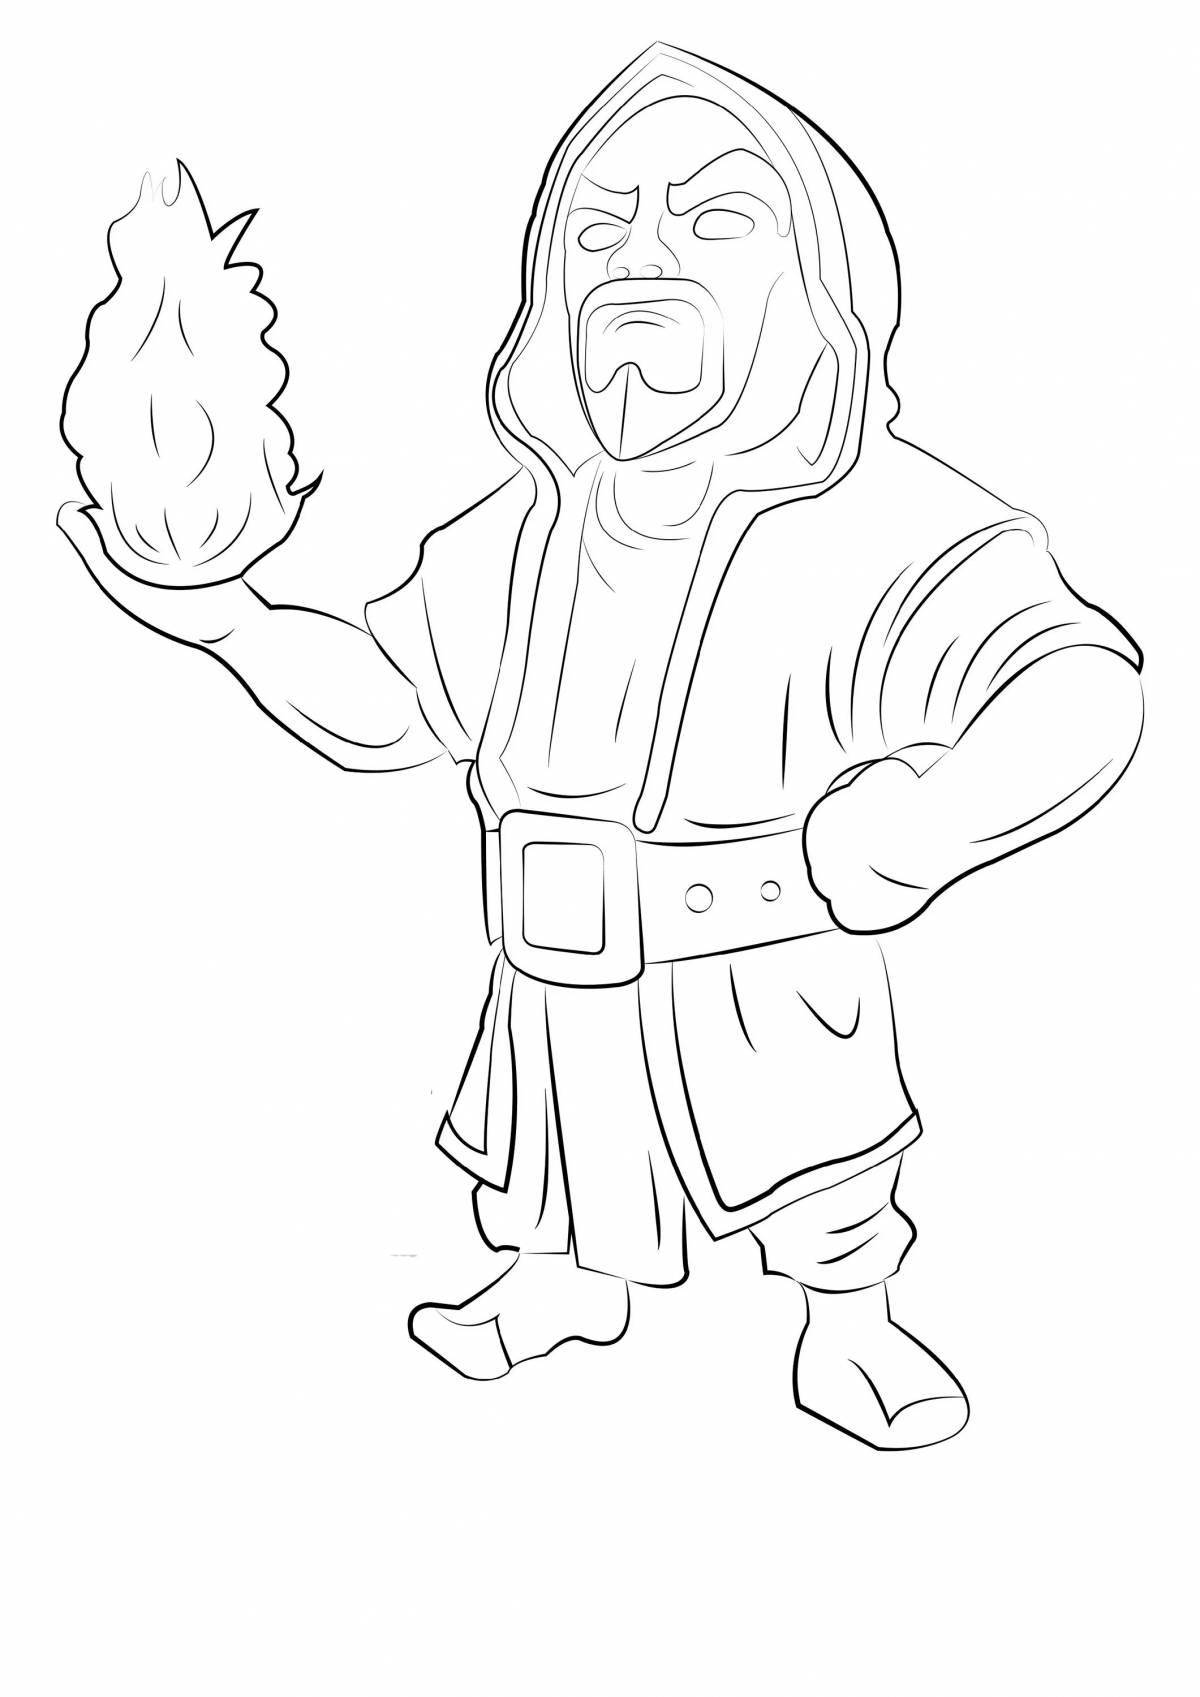 Colorful clash of clans coloring page